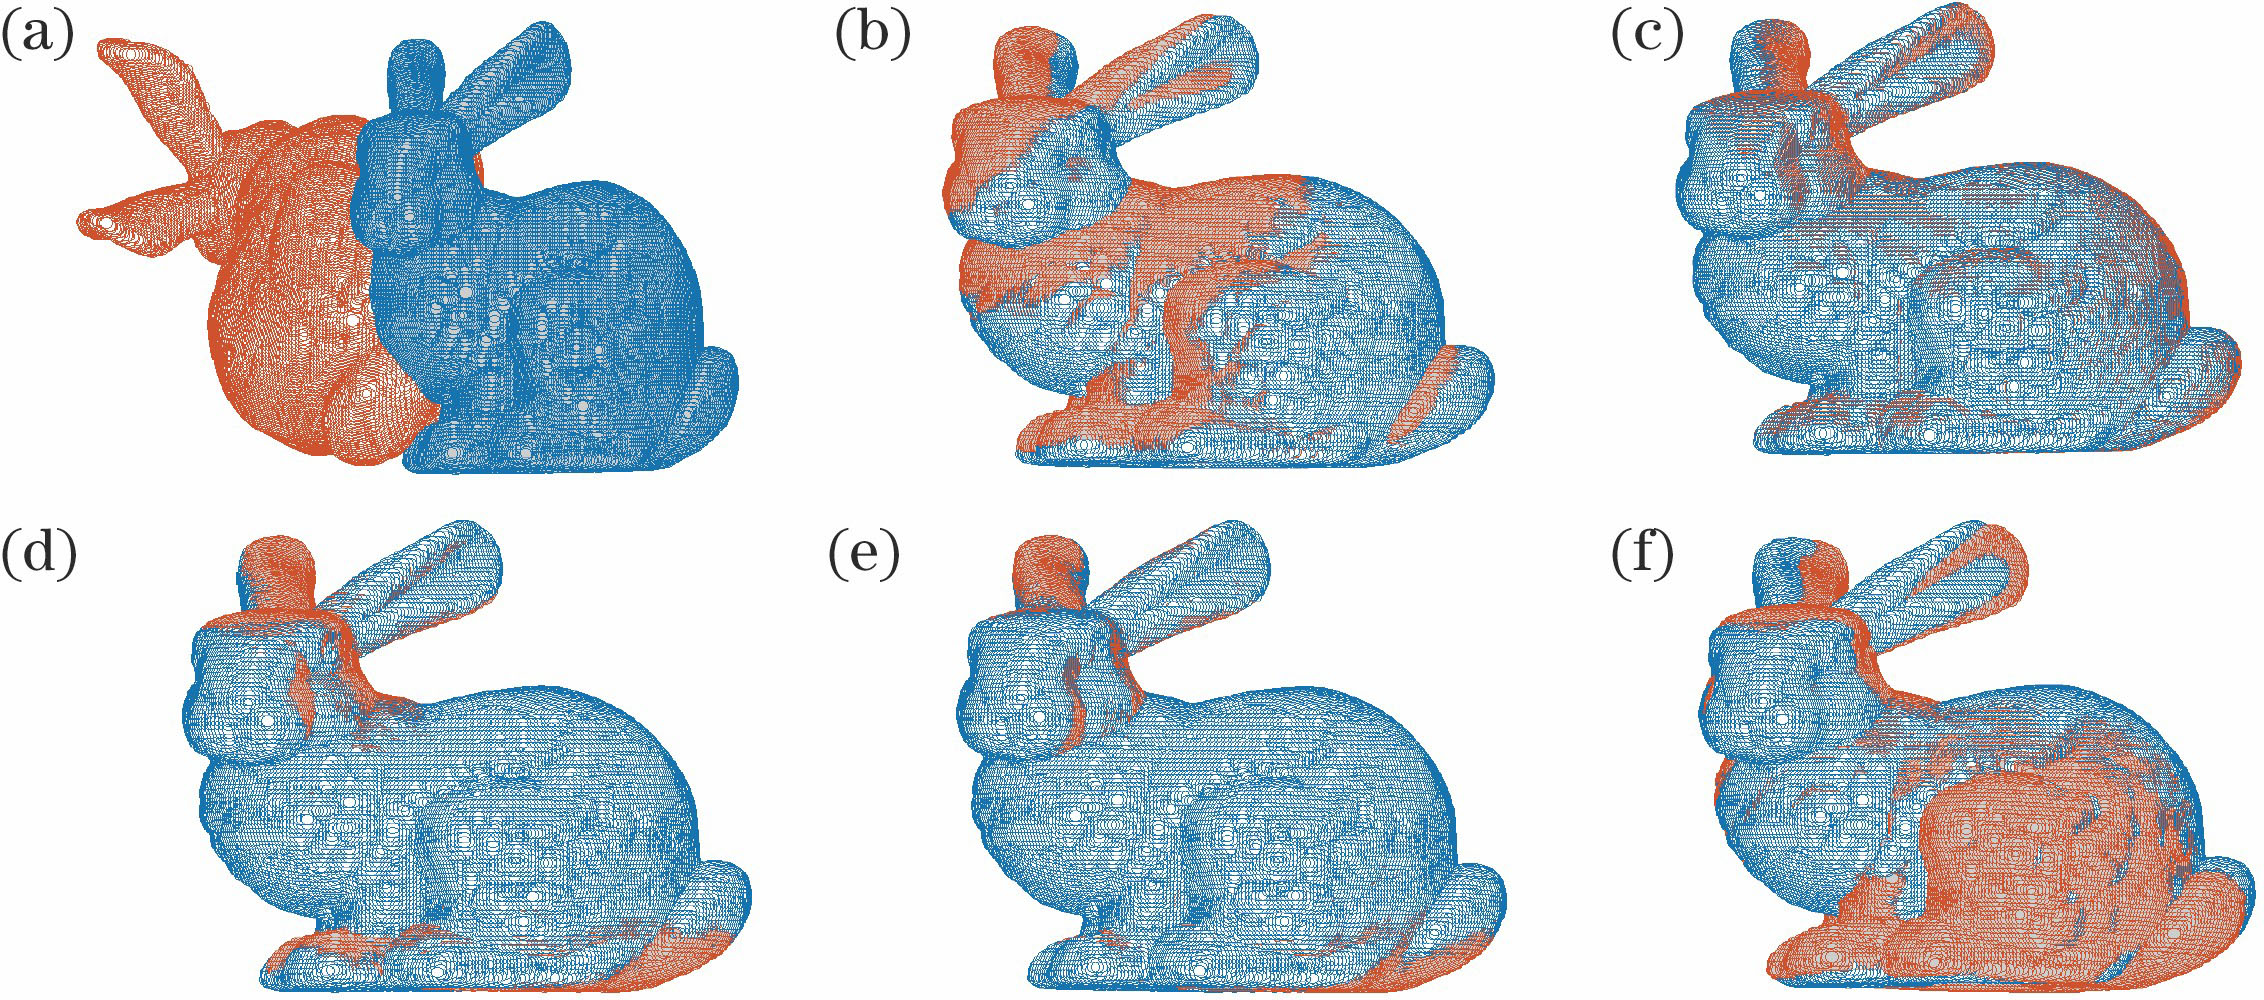 Registration results of Bunny. (a) Original point cloud; (b) initial registration by algorithm in Ref. [26]; (c) precise registration by algorithm in Ref. [26]; (d) initial registration by proposed algorithm; (e) precise registration by proposed algorithm; (f) registration by classic ICP algorithm